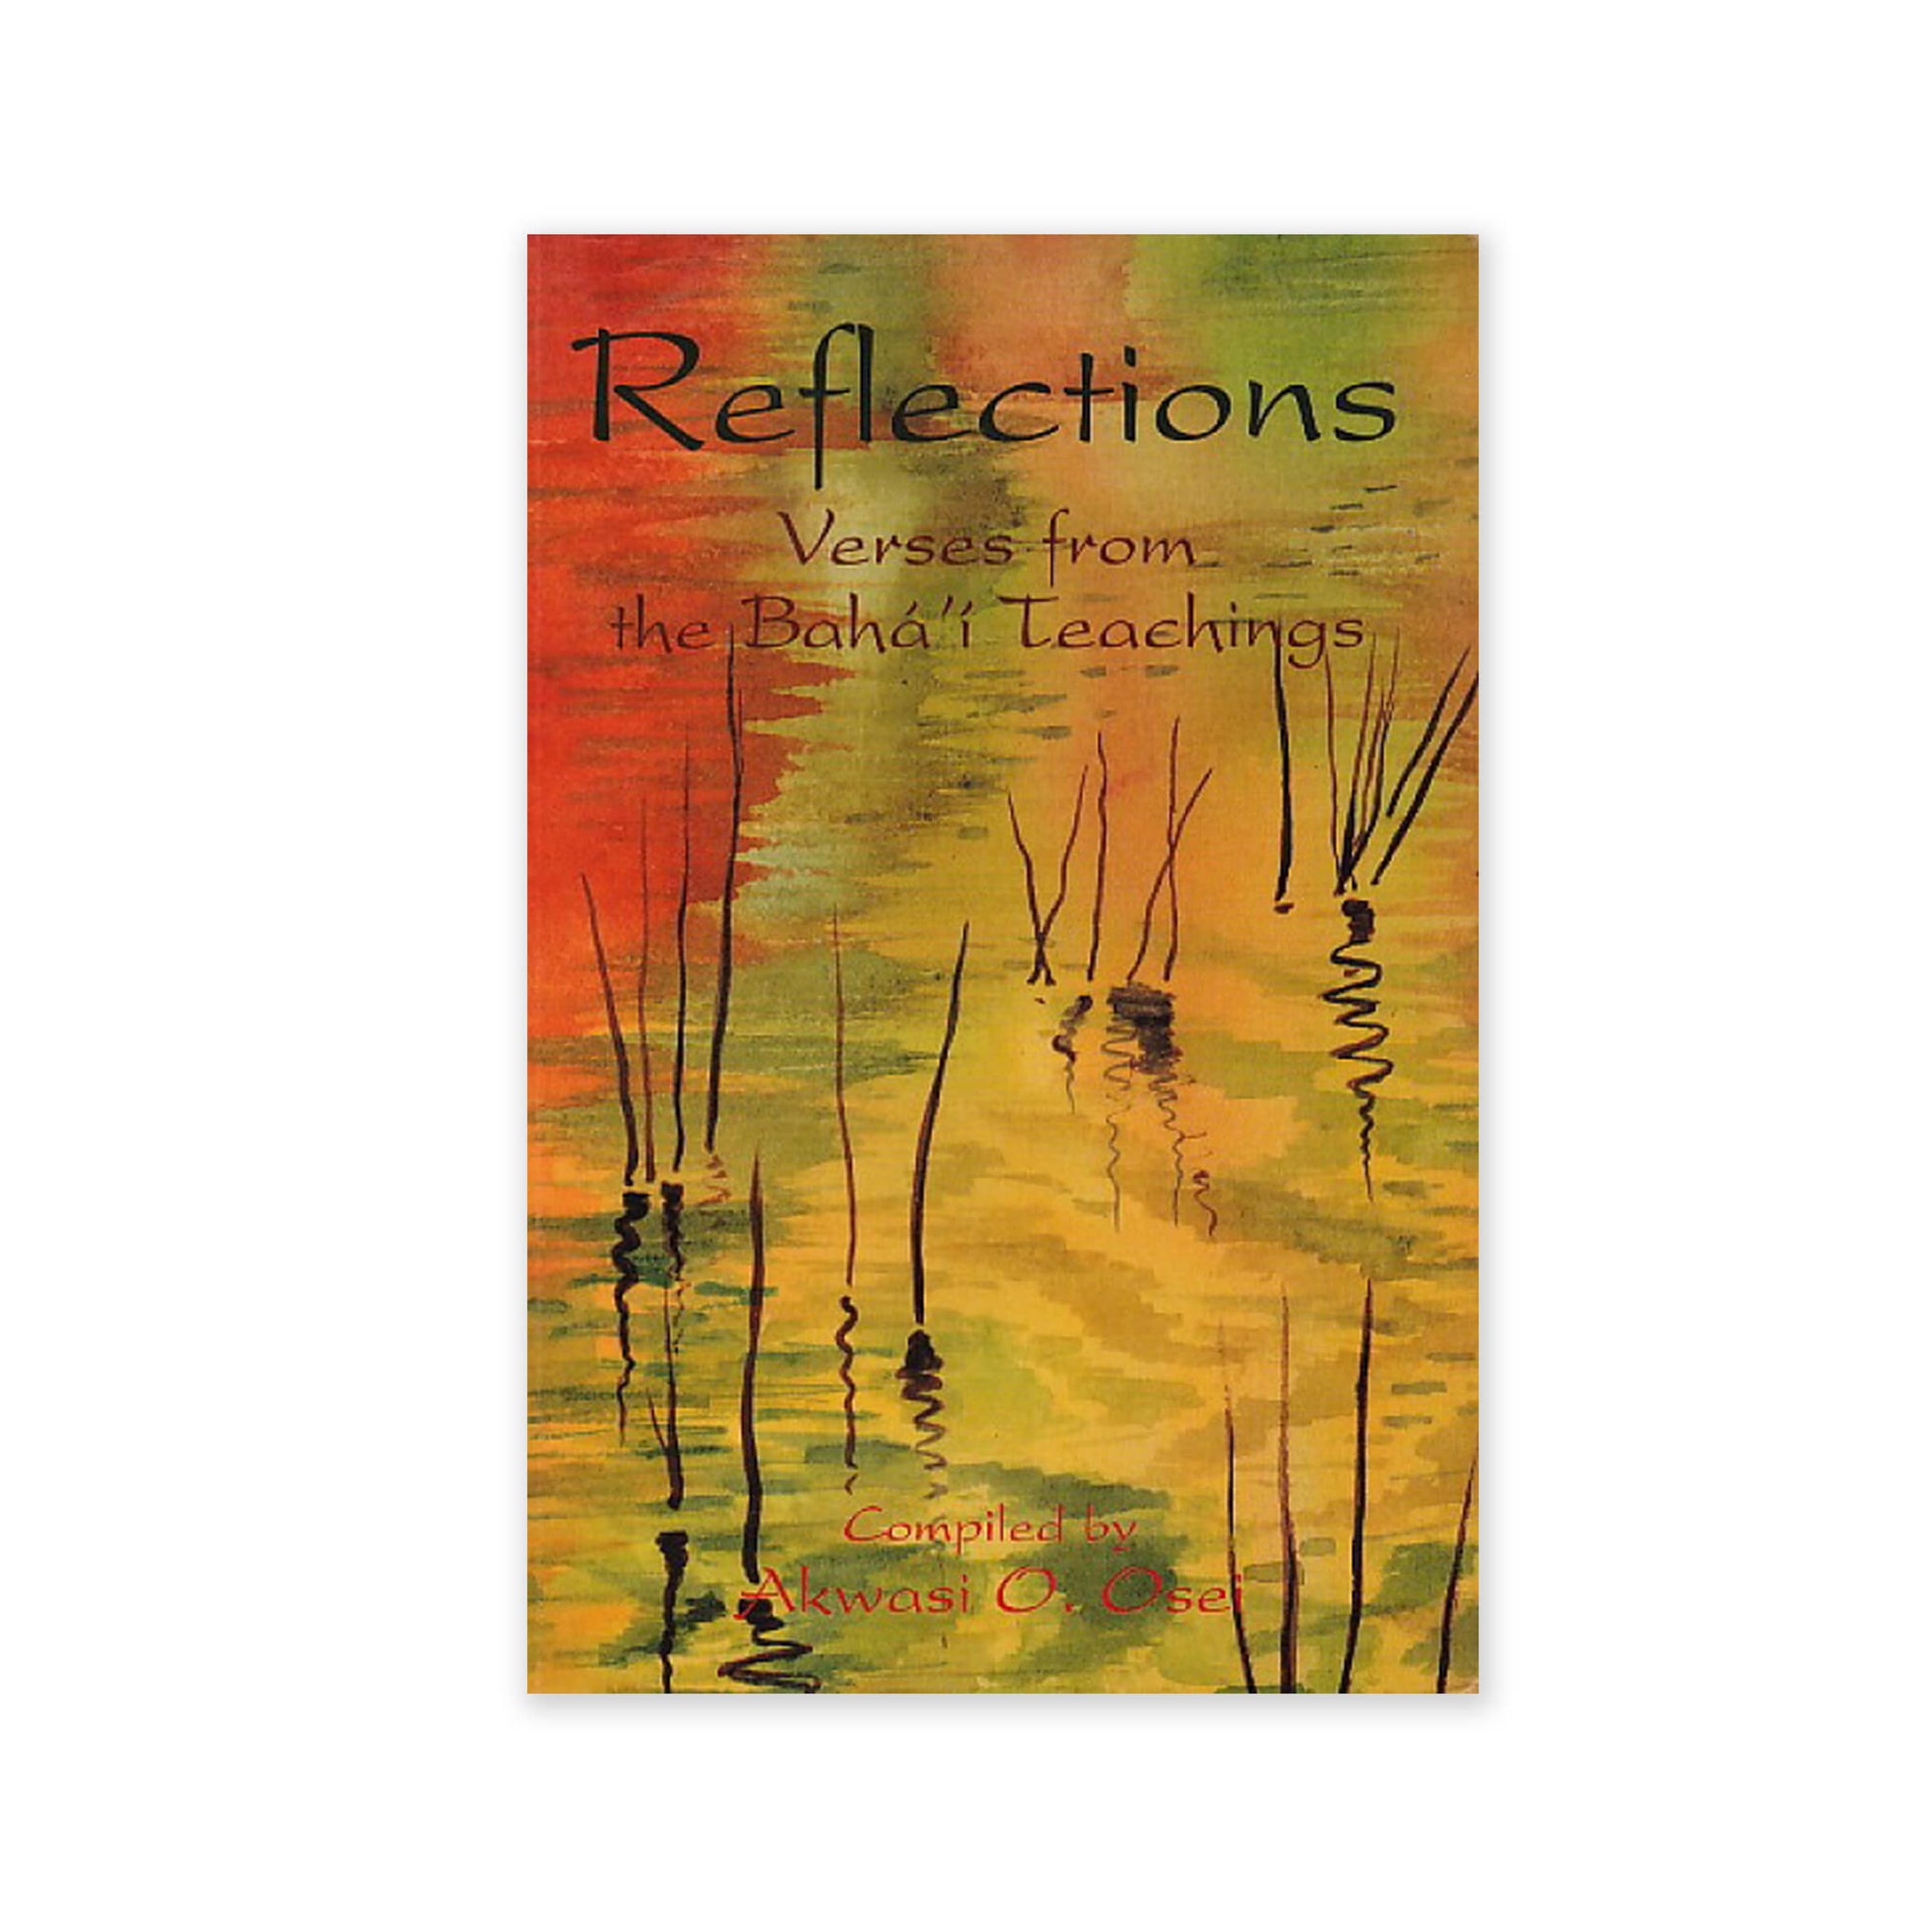 Reflections - Verses for Contemplation from the Baha'i Teachings